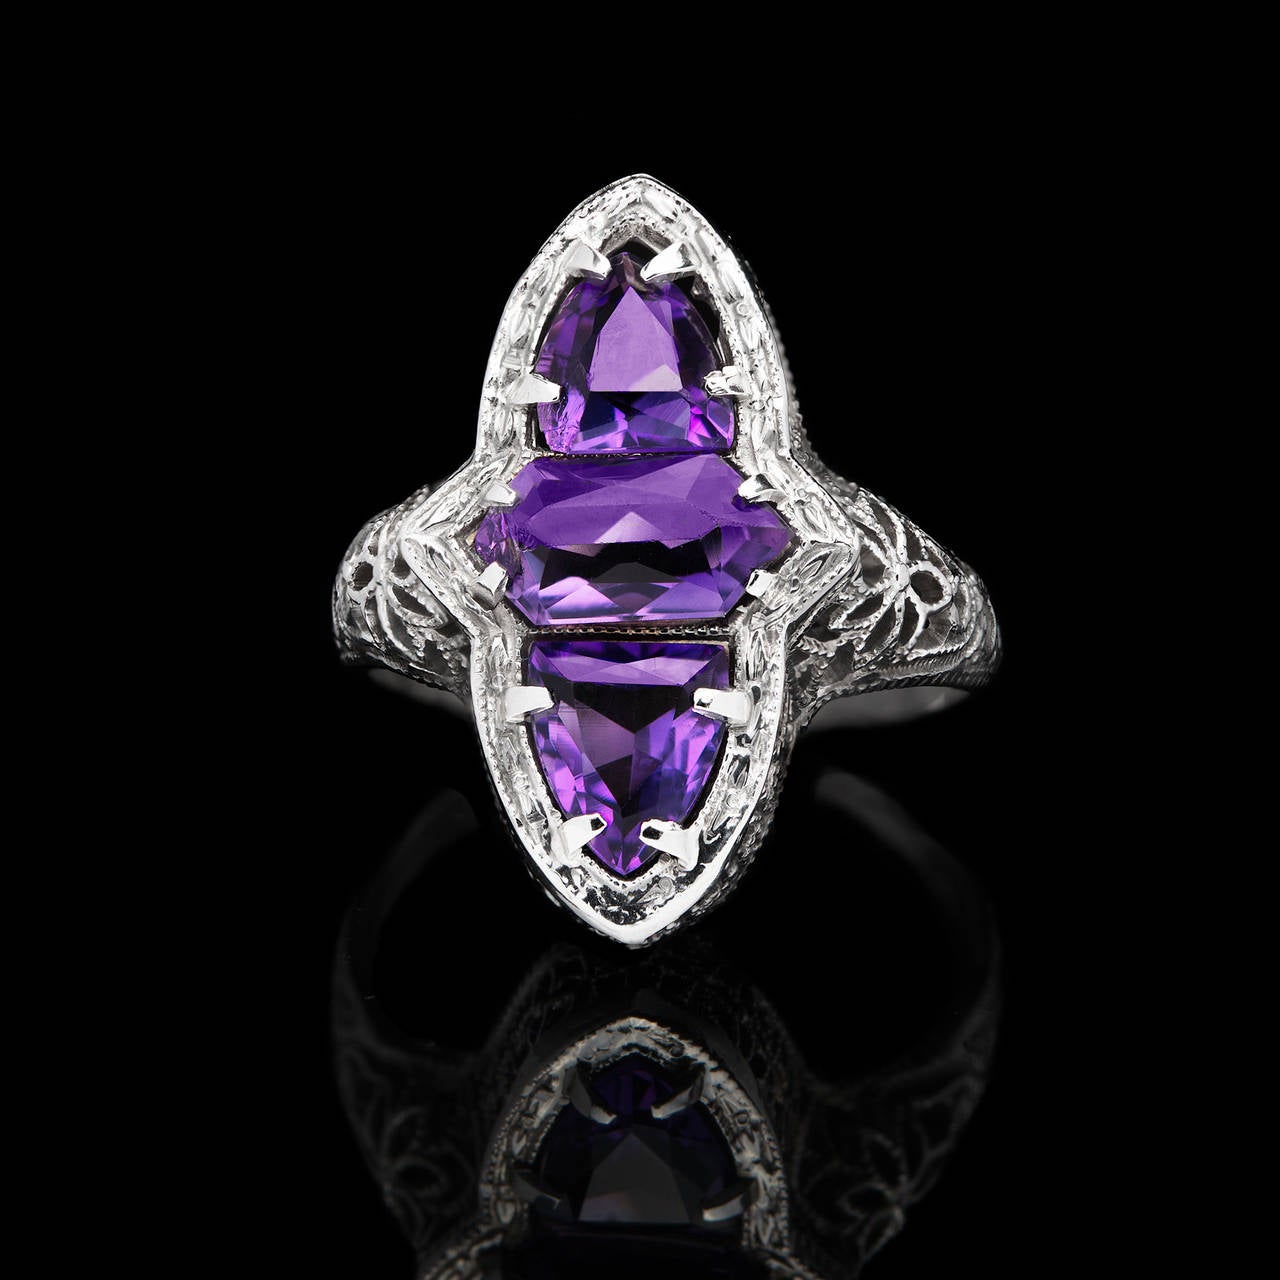 Striking Filigree Ring Crafted in 14Kt White Gold with 21mm Long Navette Shaped Face Featuring 3 fancy-cut Amethysts. The ring is a size 5.0 and weighs 2.5 grams.